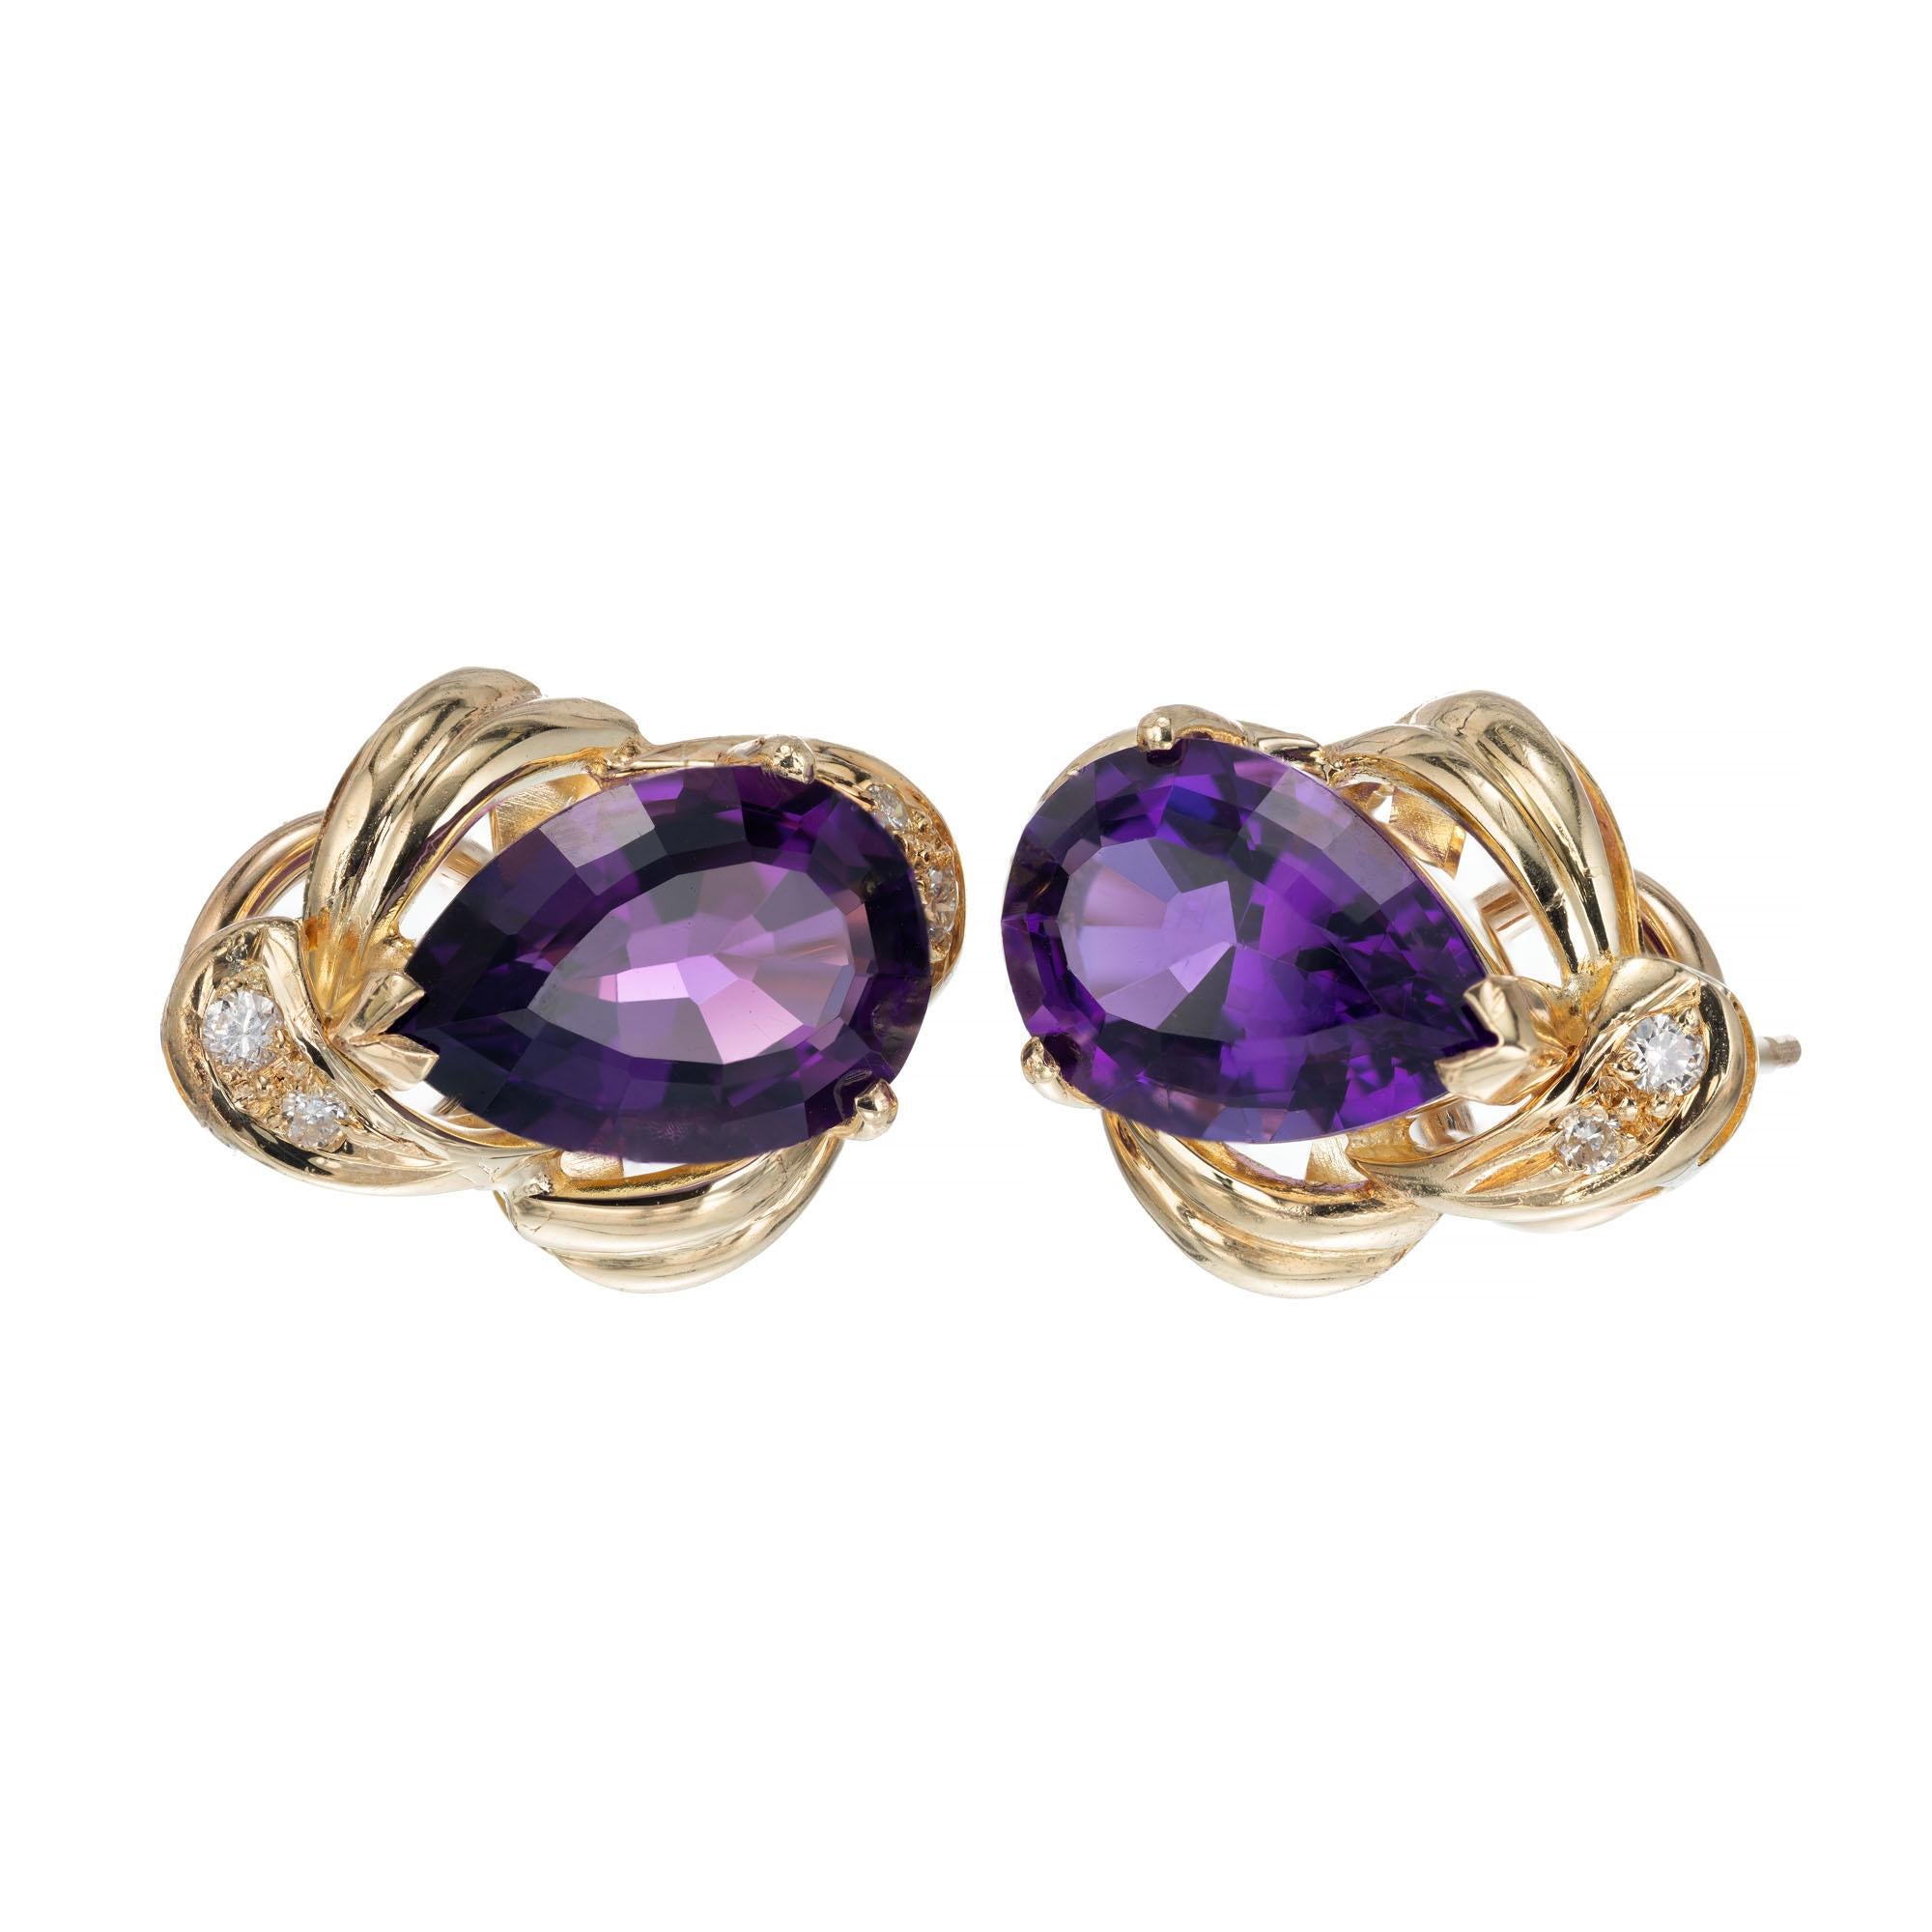 Purple pear shaped amethyst and diamond clip post 14k yellow gold earrings.

2 pear shaped purple amethyst , approx. total weight 6.00cts 
8 round brilliant cut diamonds J VS, approx. .12cts
14k yellow gold 
Stamped: 14k
8.1 grams
Top to bottom: